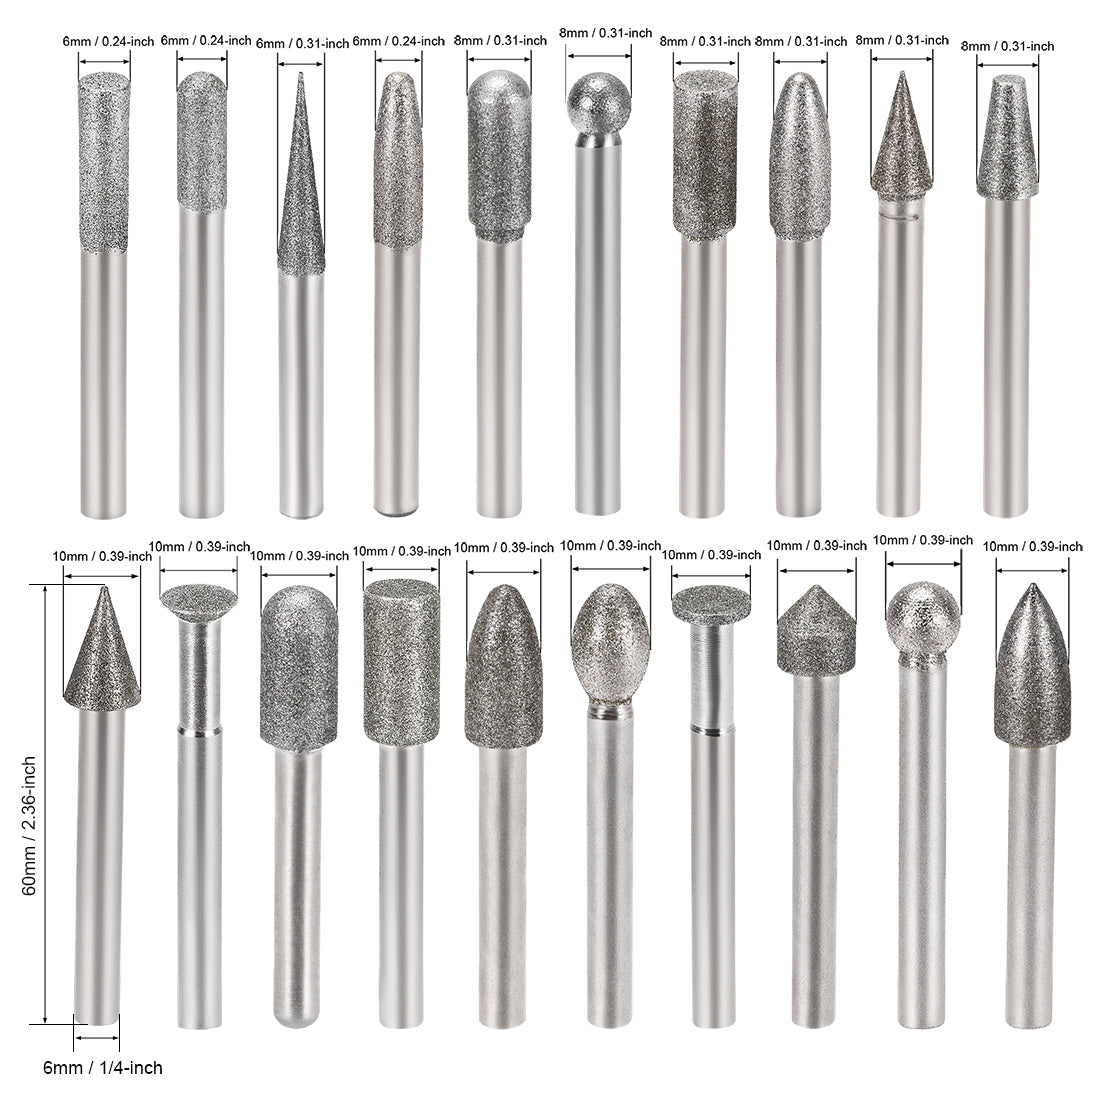 uxcell Uxcell Diamond Burrs Set Grinding Drill Bits for Carving Rotary Tool 1/4-Inch Shank 6mm 8mm 10mm 150 Grit 20 Pcs